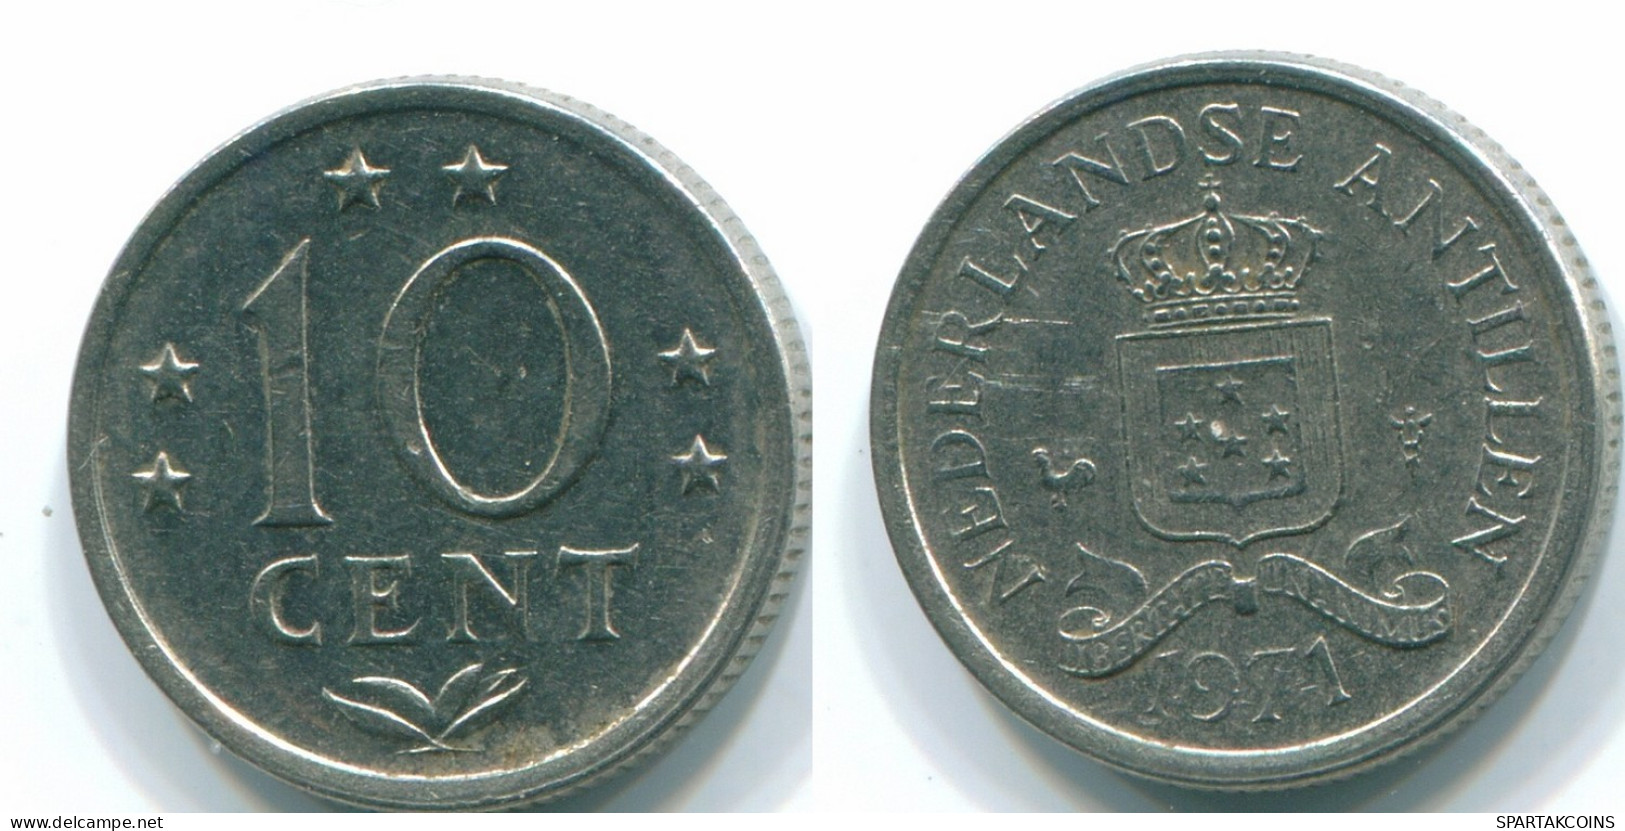 10 CENTS 1971 NETHERLANDS ANTILLES Nickel Colonial Coin #S13480.U.A - Netherlands Antilles